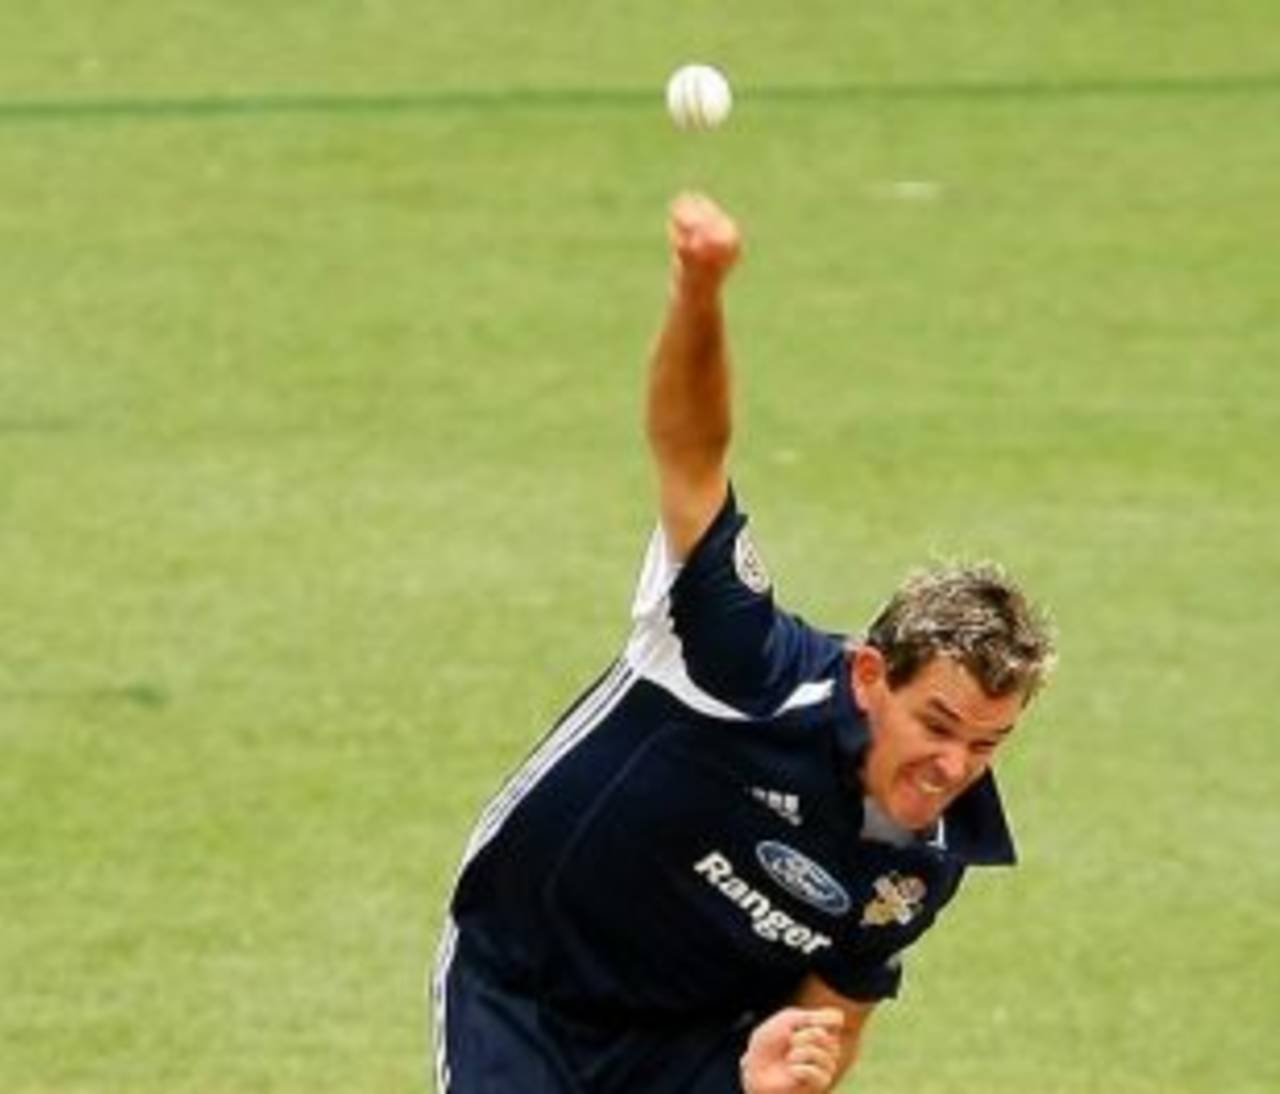 Clint McKay was the star for Victoria, taking 3 for 17&nbsp;&nbsp;&bull;&nbsp;&nbsp;Getty Images